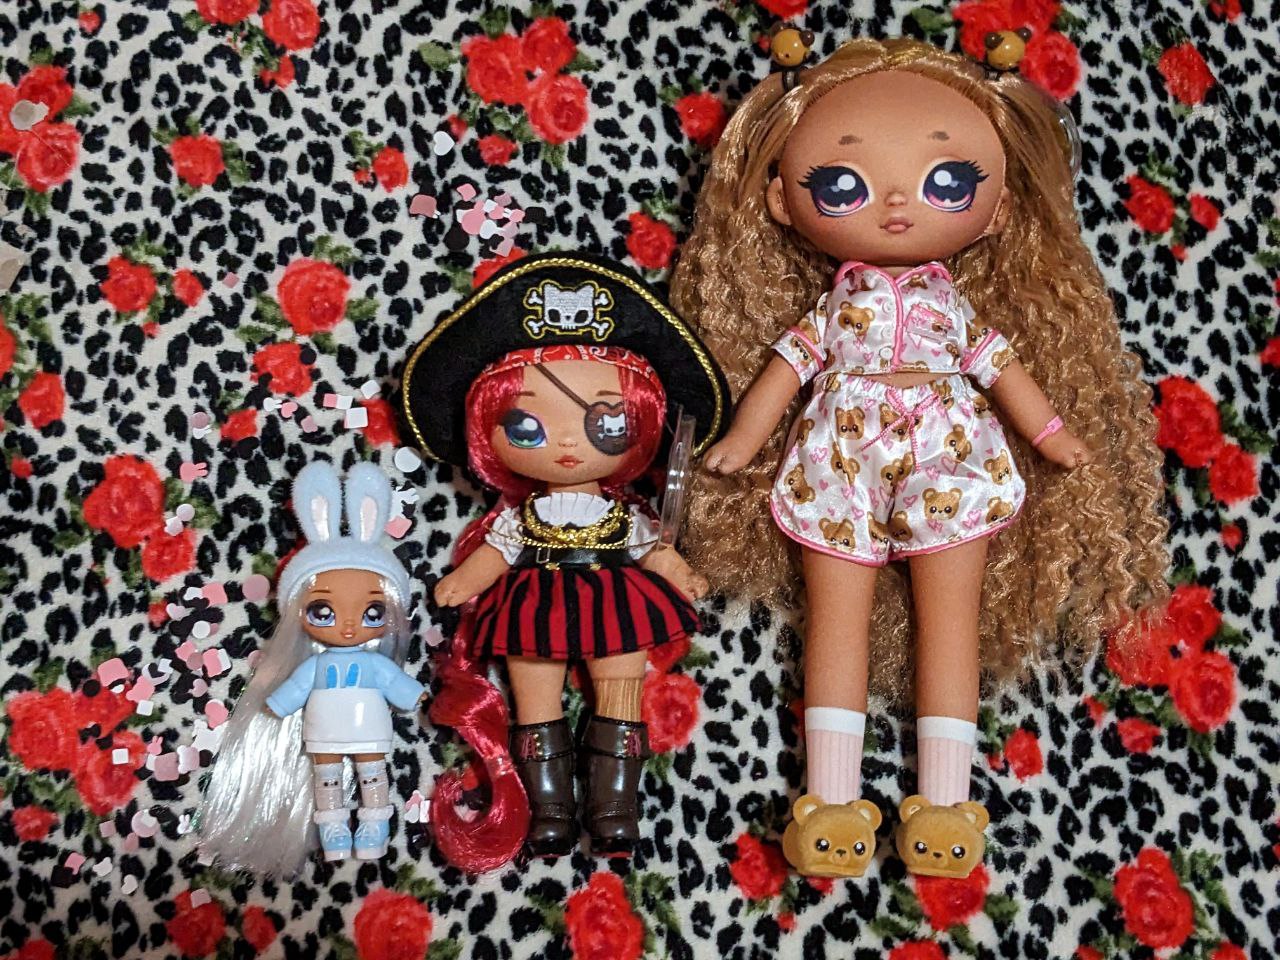 Na! Surprise Minis Series 1-4'' Fashion Doll Mystery Packaging with Confetti Surprise